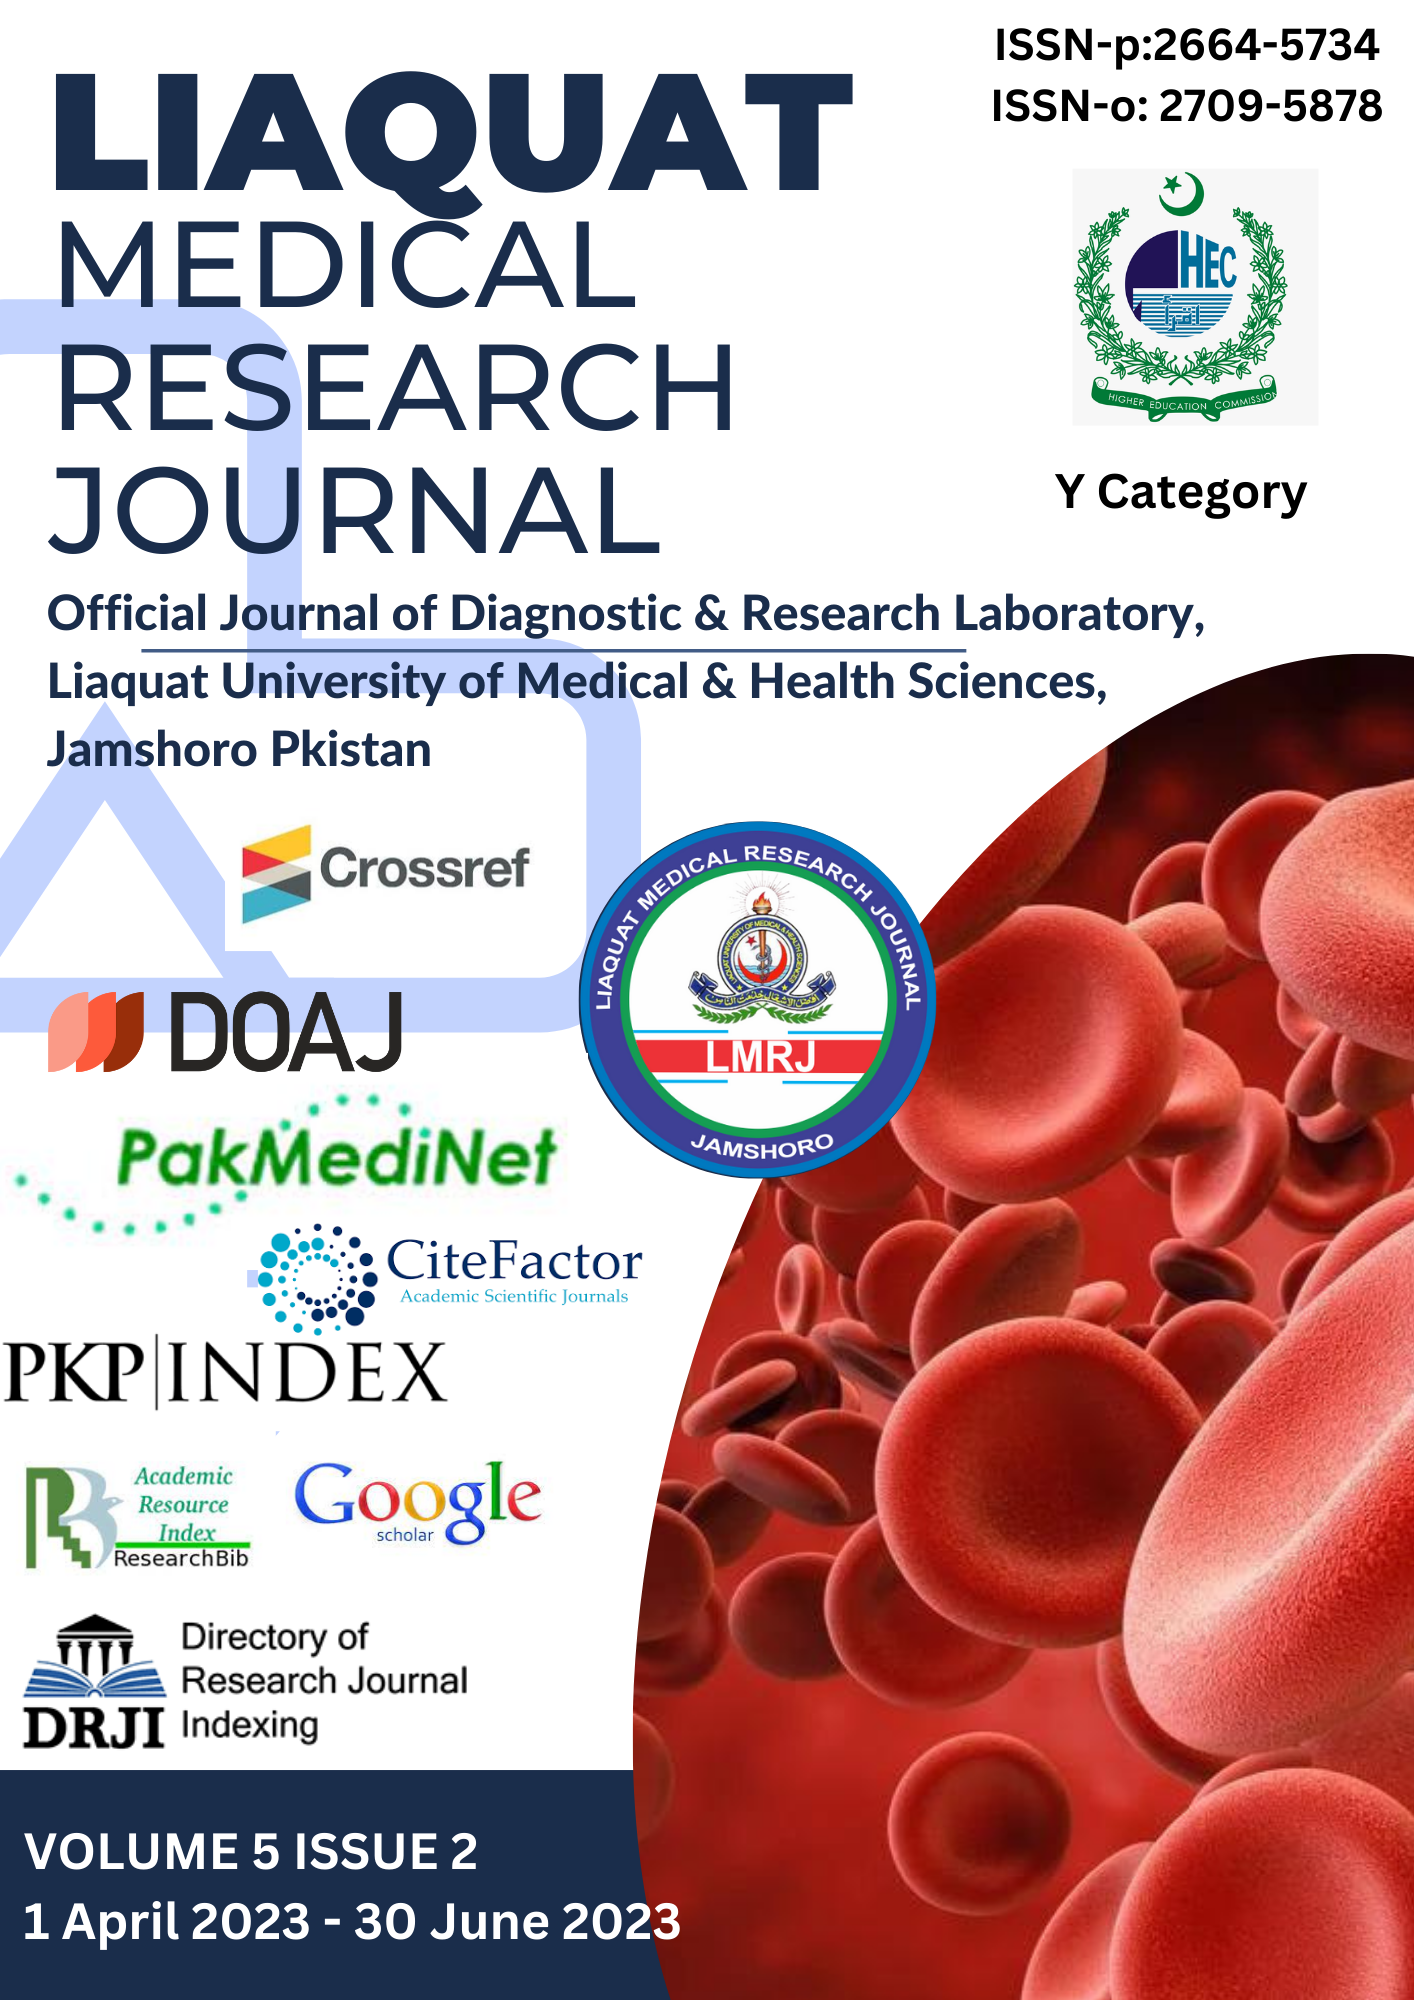 					View Vol. 5 No. 2 (2023): Liaquat Medical Research Journal (Volume 05 Issue 2)
				